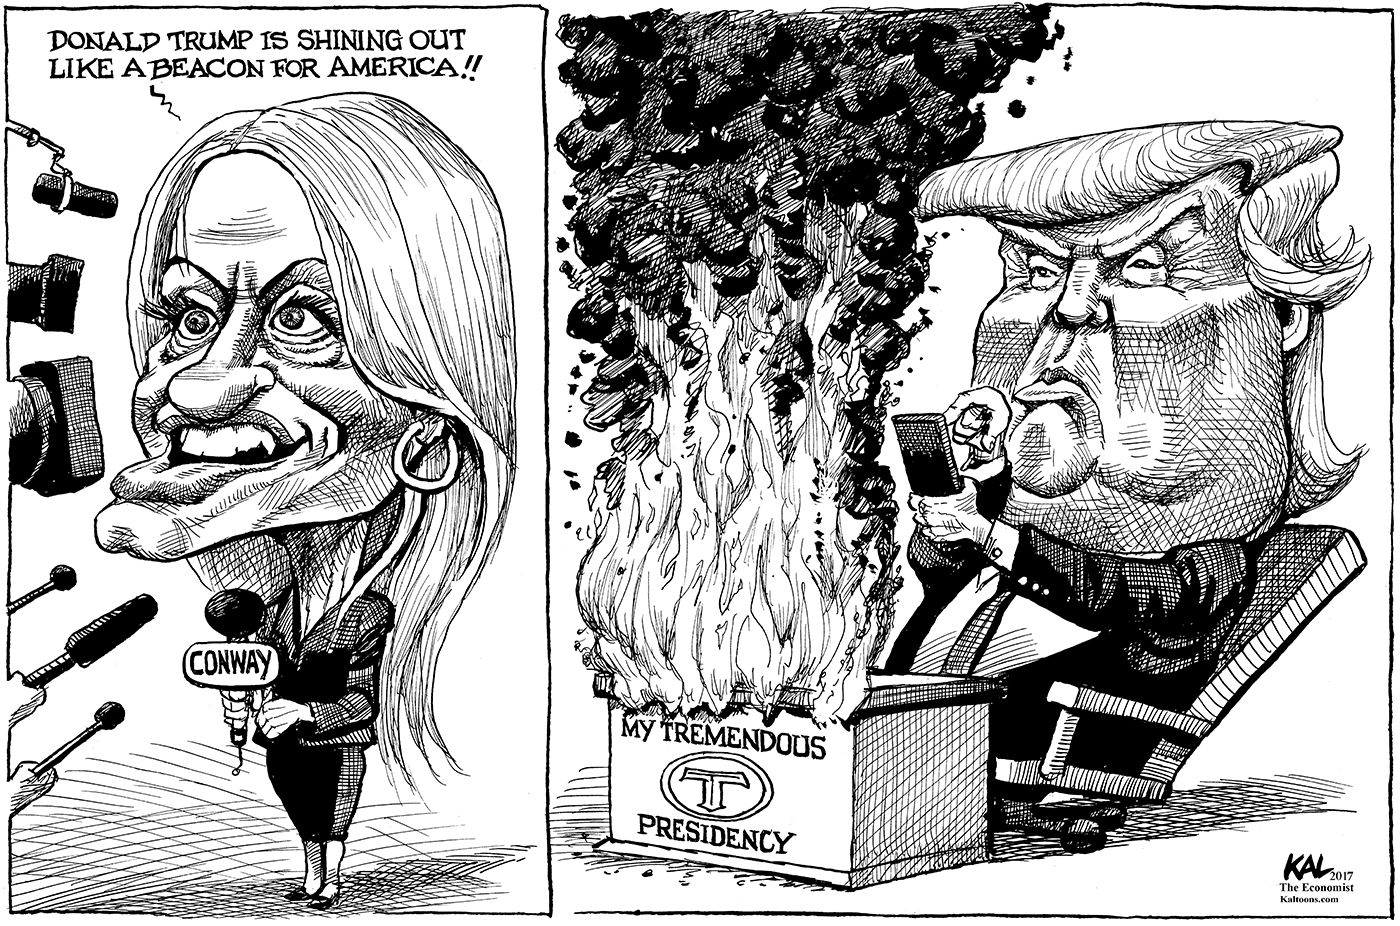 Kellyanne and Donald